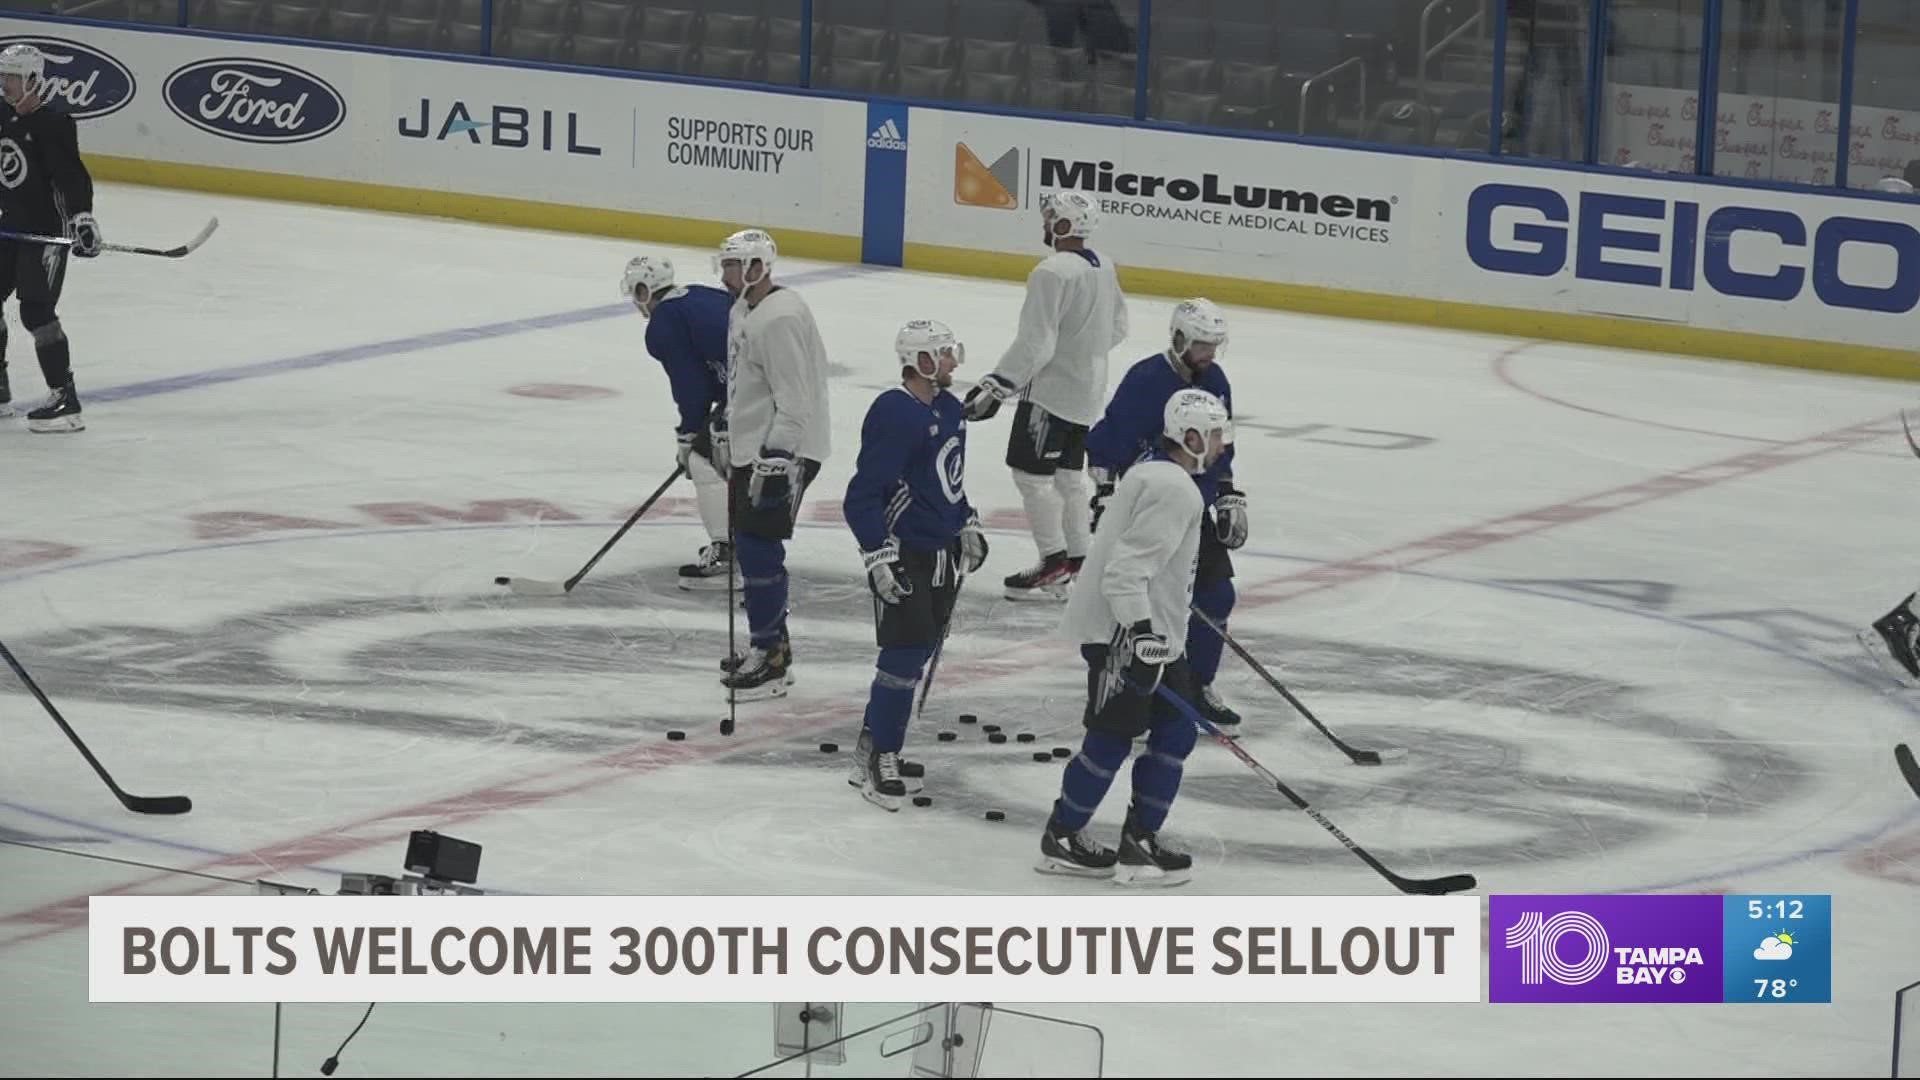 On March 26, 2015, the Bolts sold out their game inside AMALIE Arena